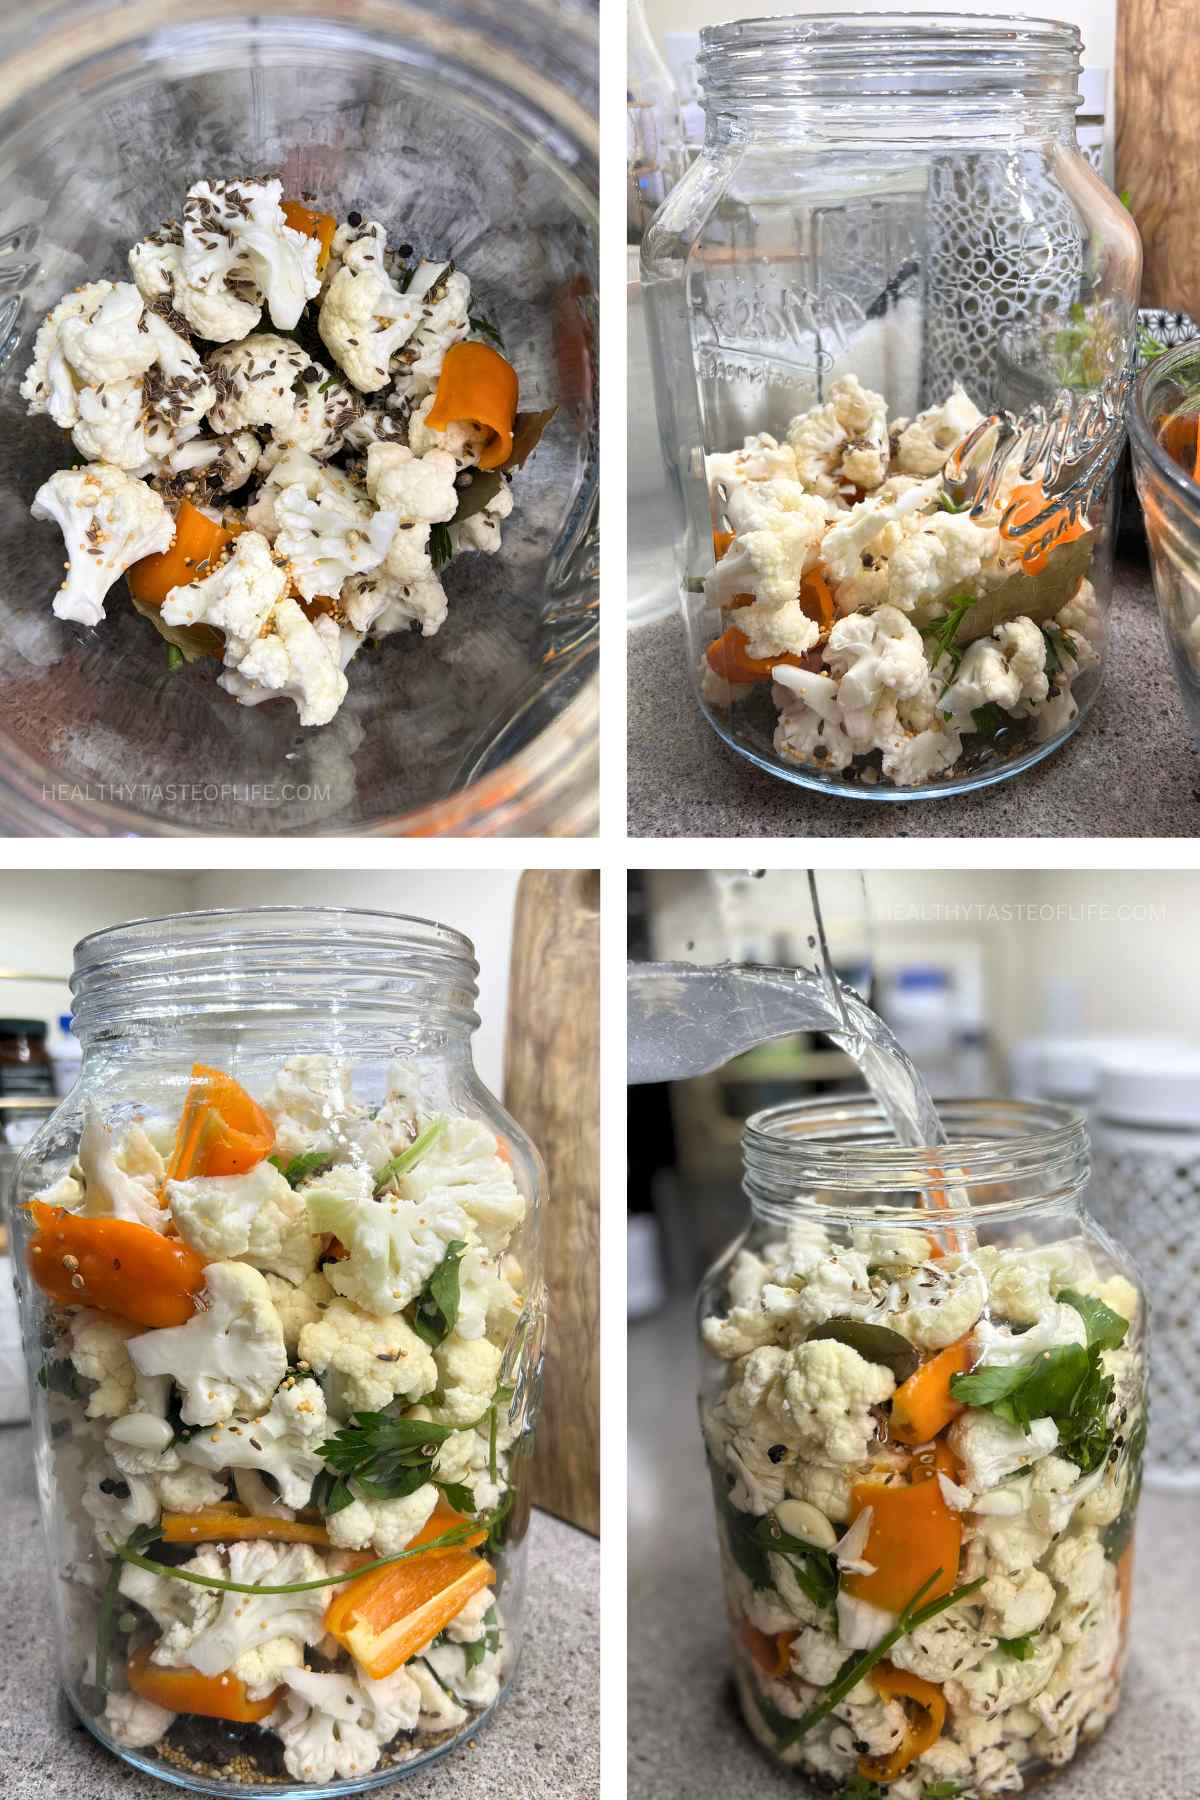 Image showing steps on how to arrange cauliflower in a jar to ferment.